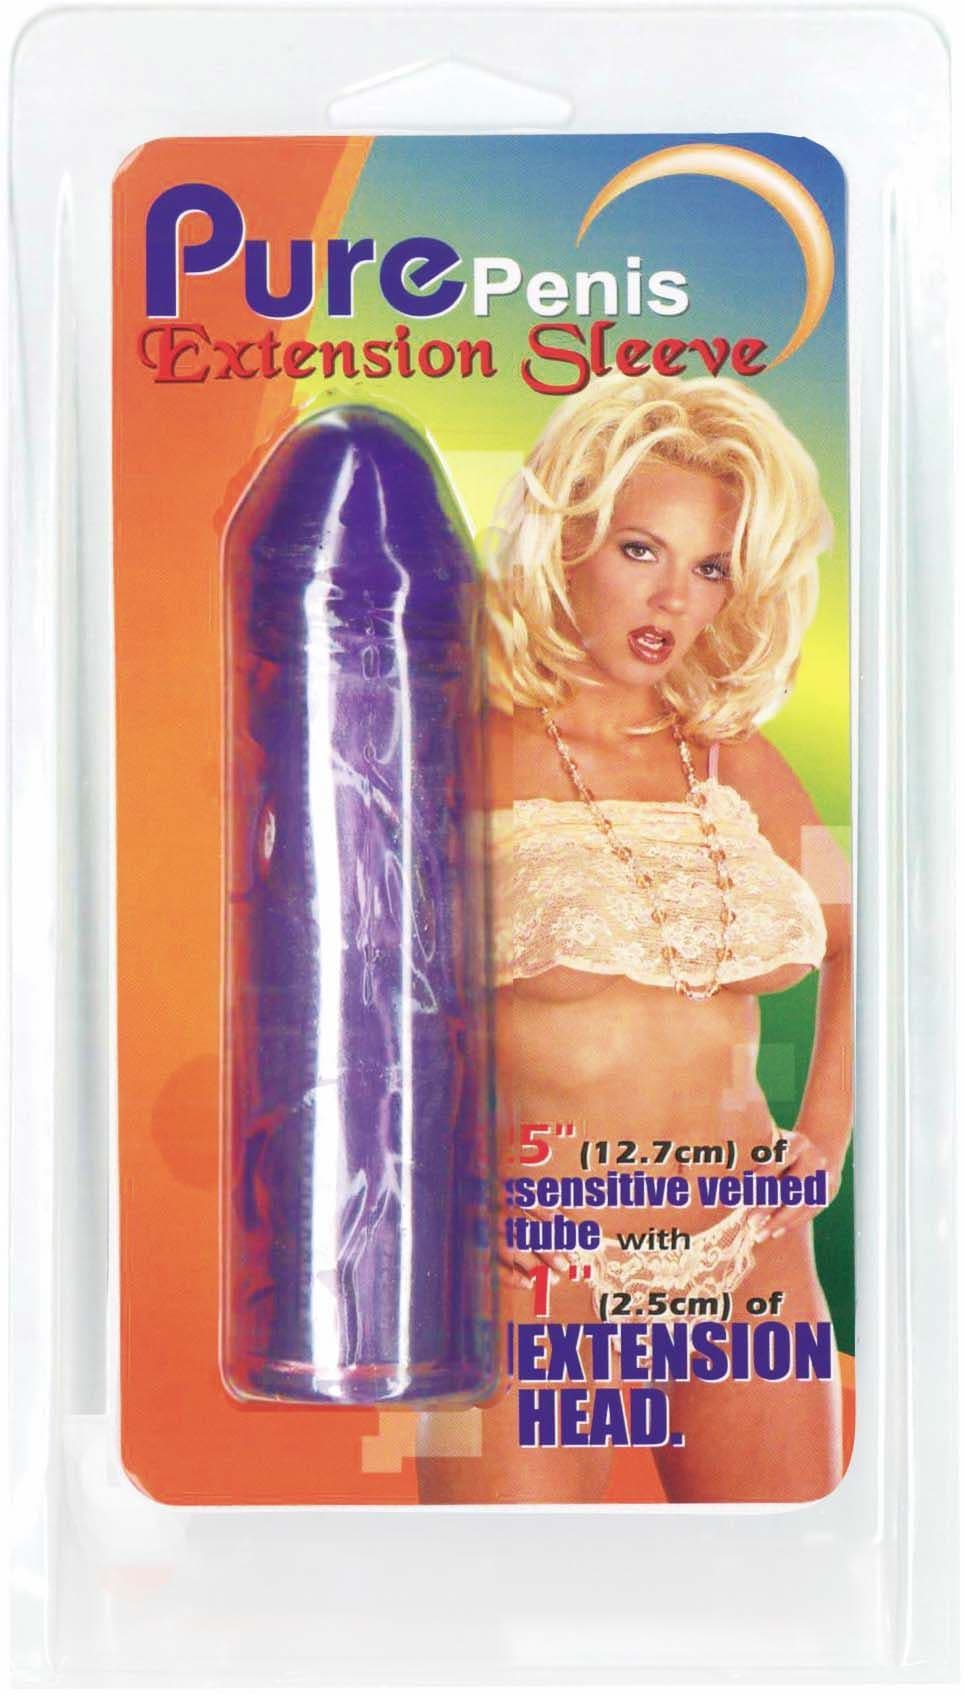 Pure Penis Extension Sleeve b2